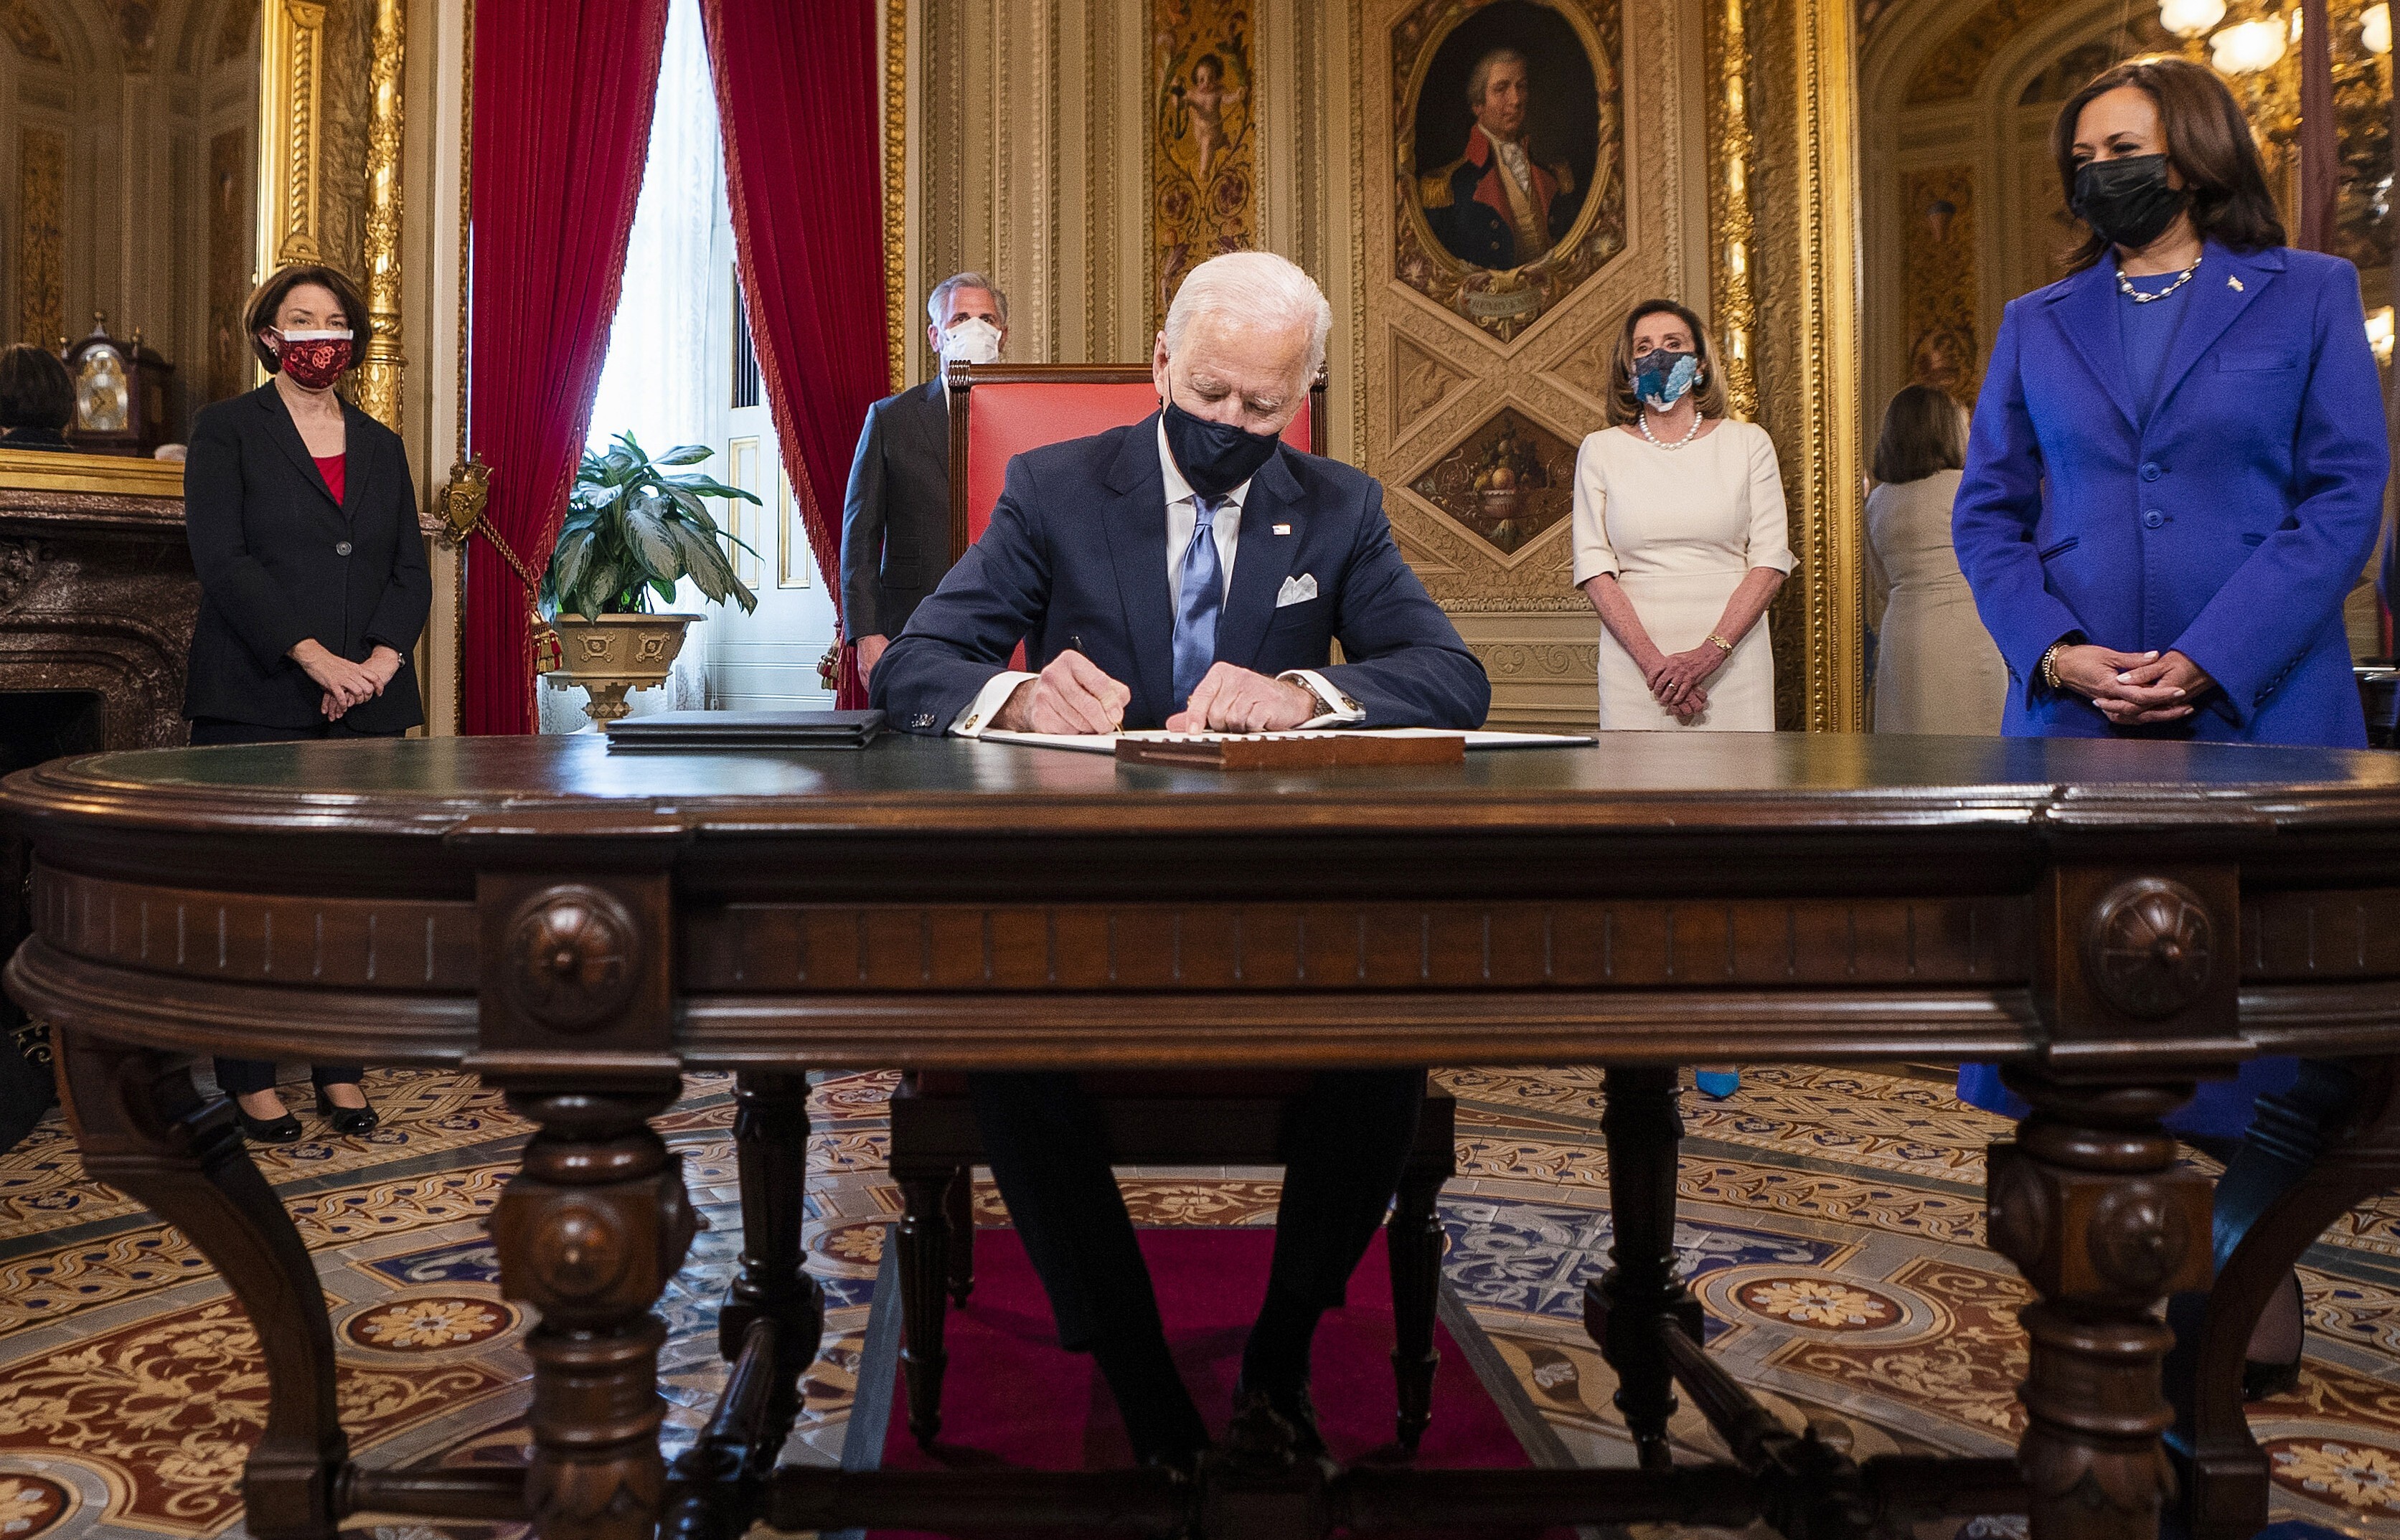 US President Joe Biden signs three documents, including cabinet nominations, in the President’s Room at the Capitol after his inauguration on January 20, as Vice-President Kamala Harris looks on. His proposed cabinet would be the most diverse in US history, if confirmed by the Senate. Photo: AP